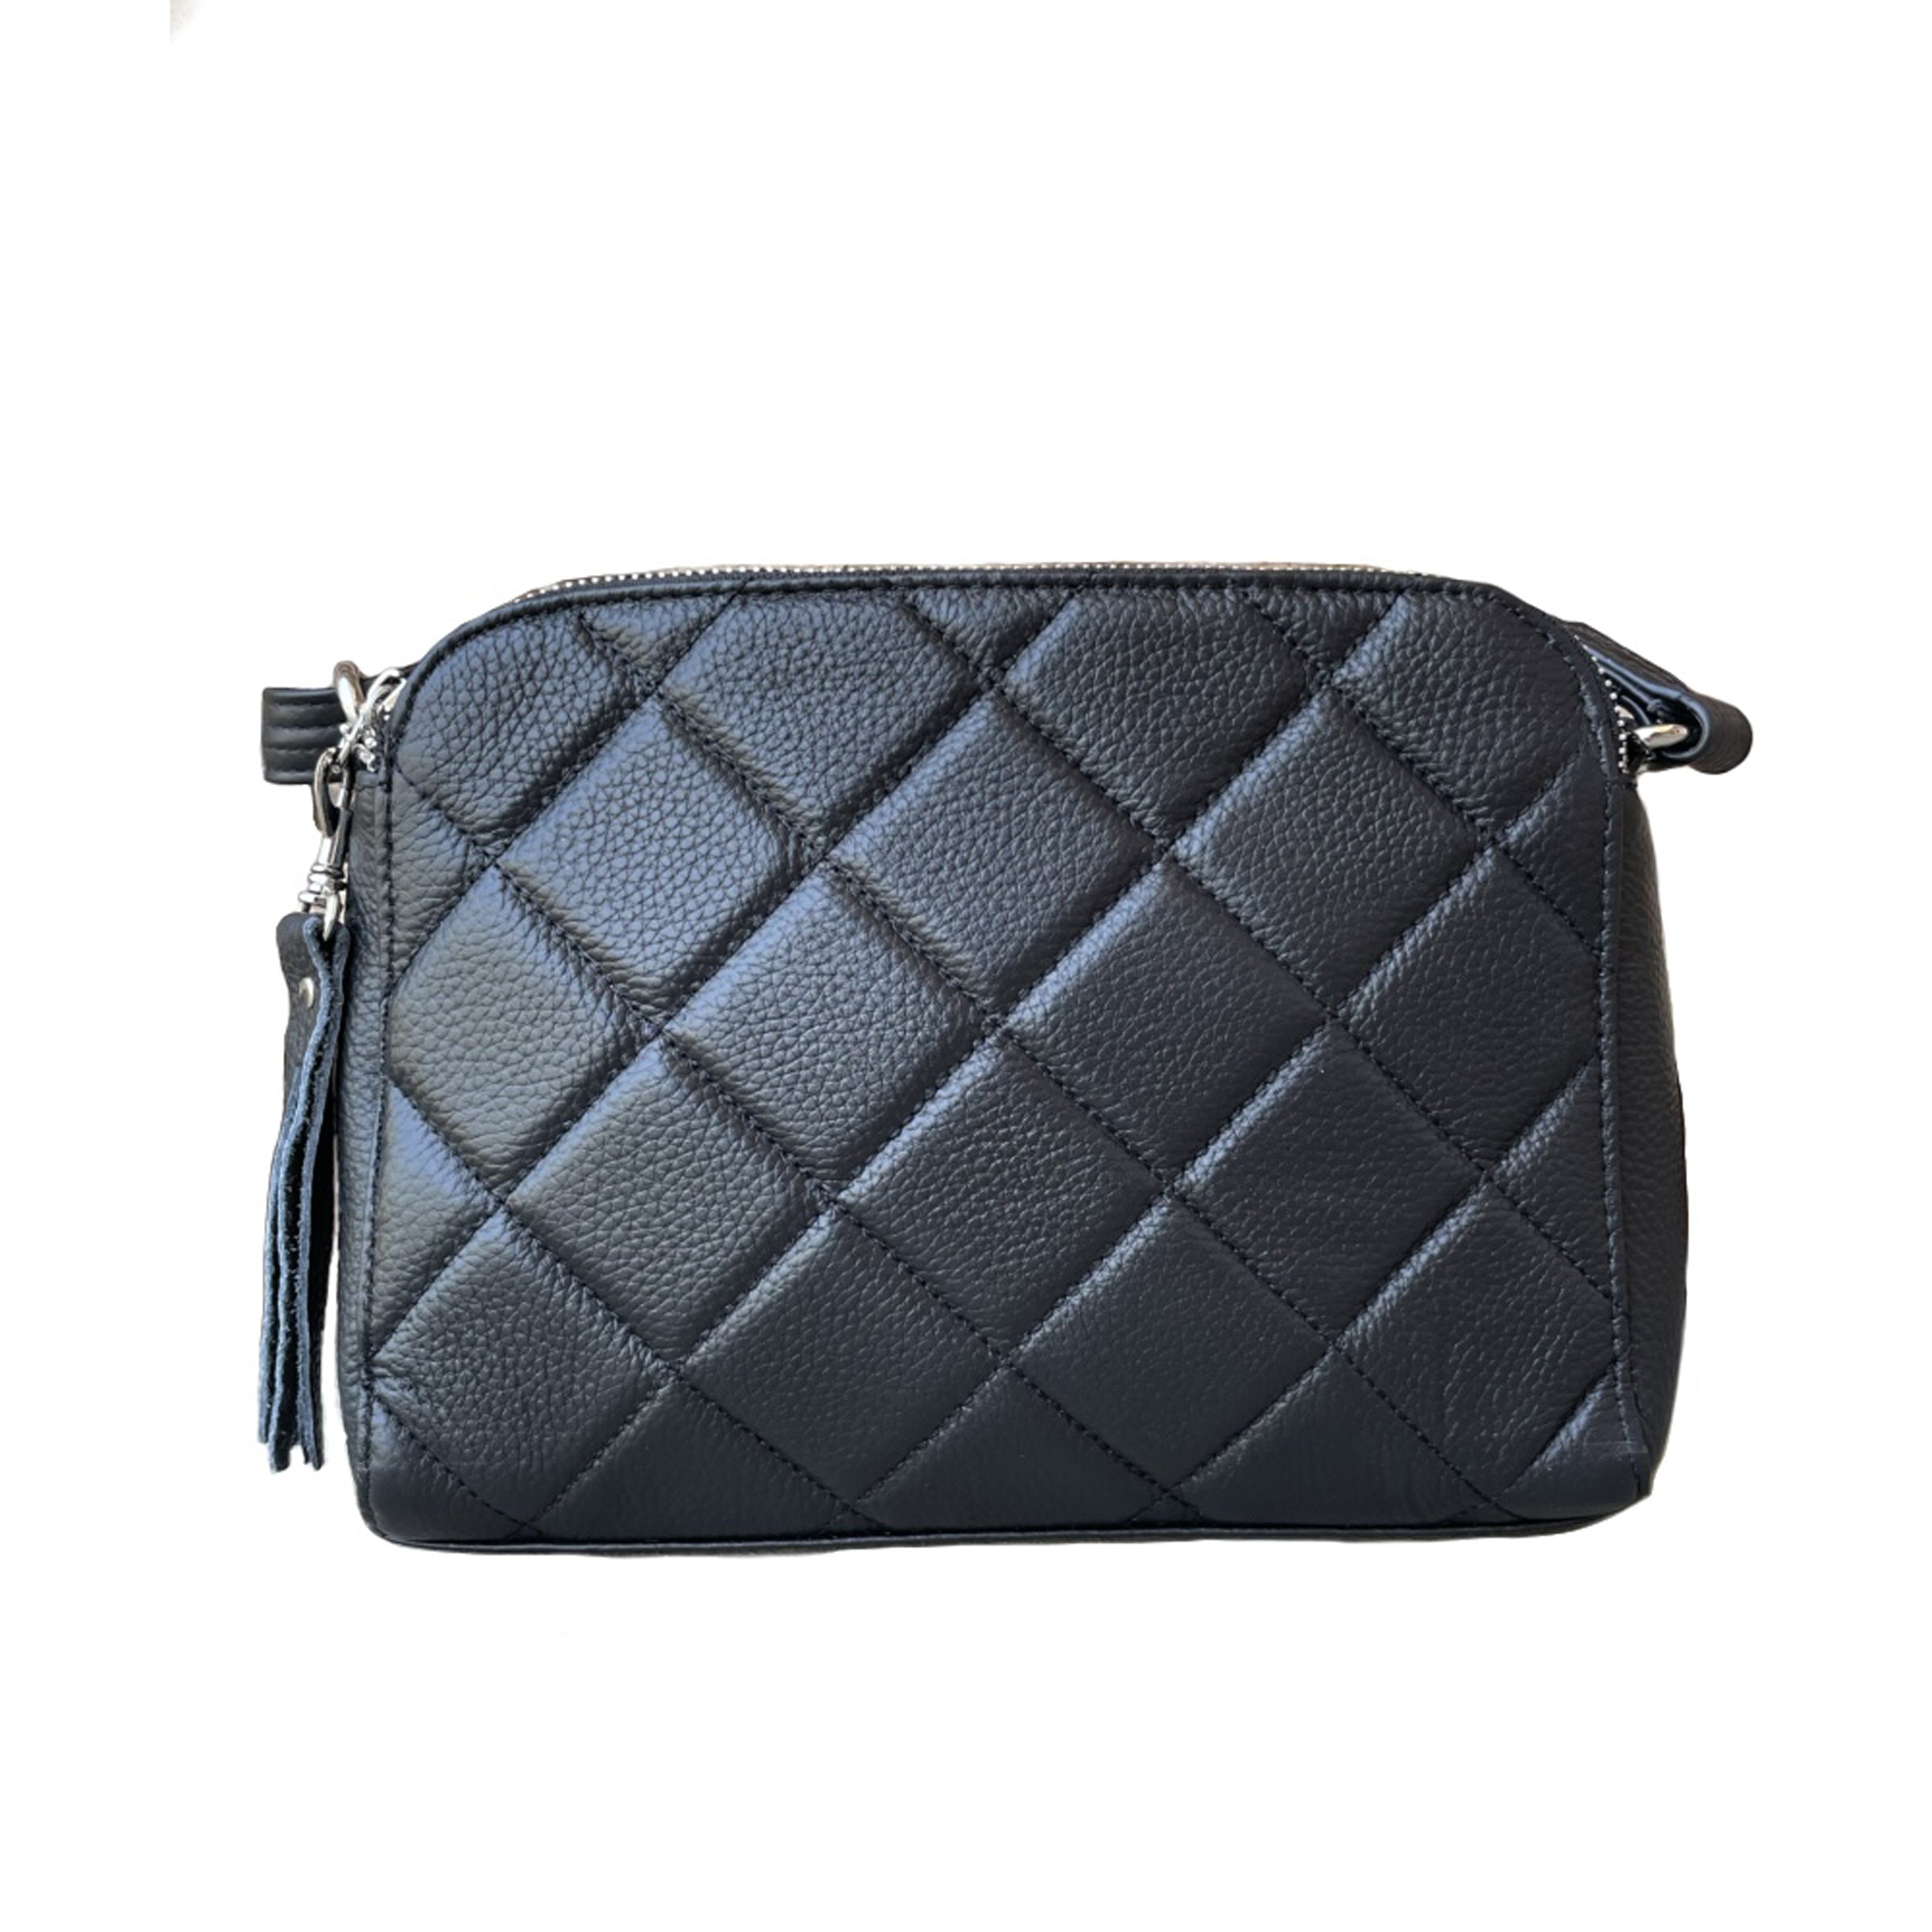 Bella Luna Small Quilted Crossbody Handbag or Shoulder Bag with Flap Purse  with Chain Strap for Women (Black - Graphite Chain): Handbags: Amazon.com